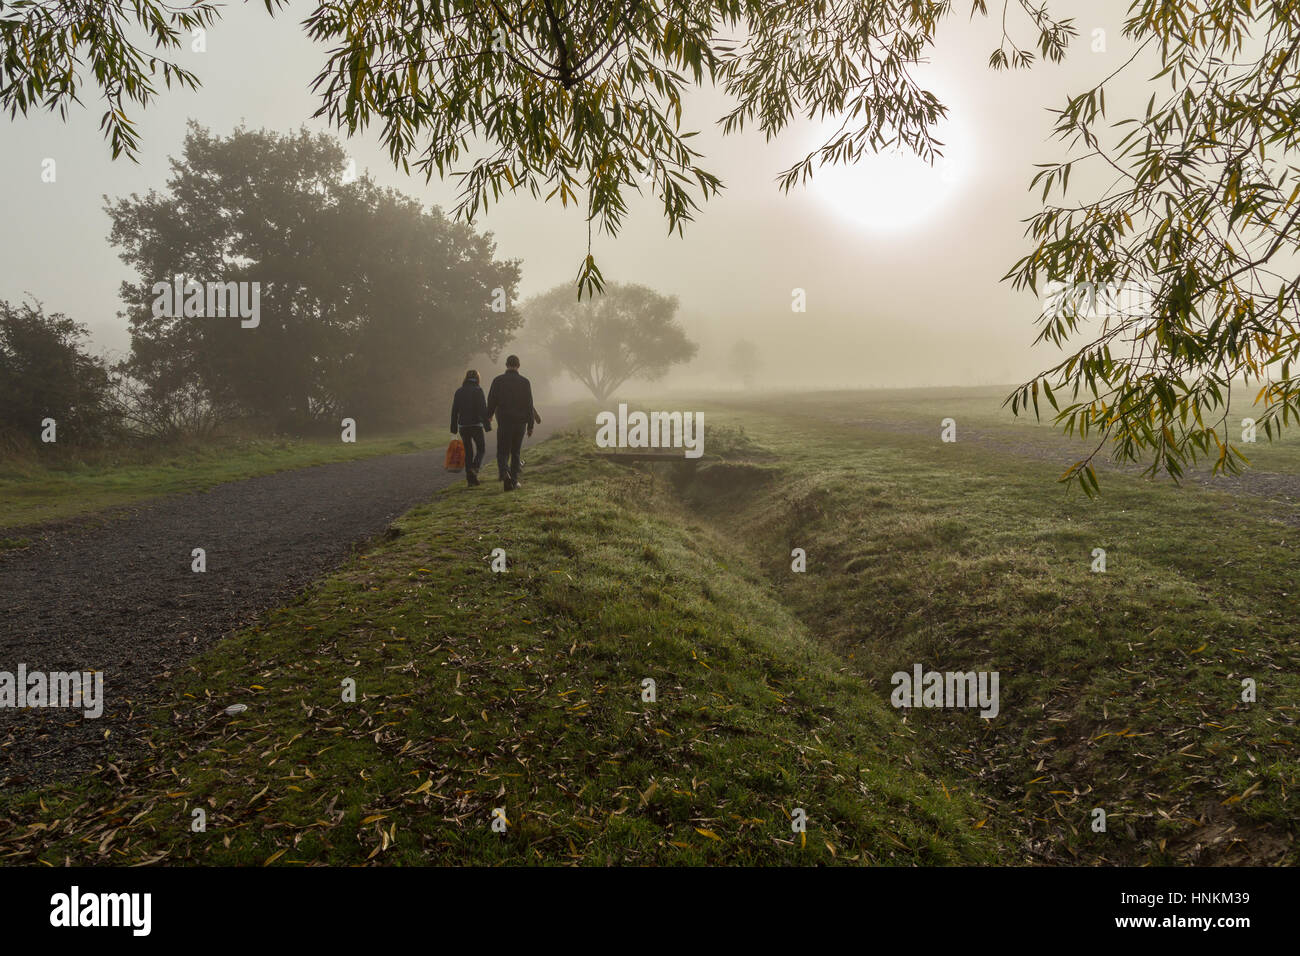 Taken on an autumn foggy morning with beautiful muted greens of the grass and trees. Stock Photo